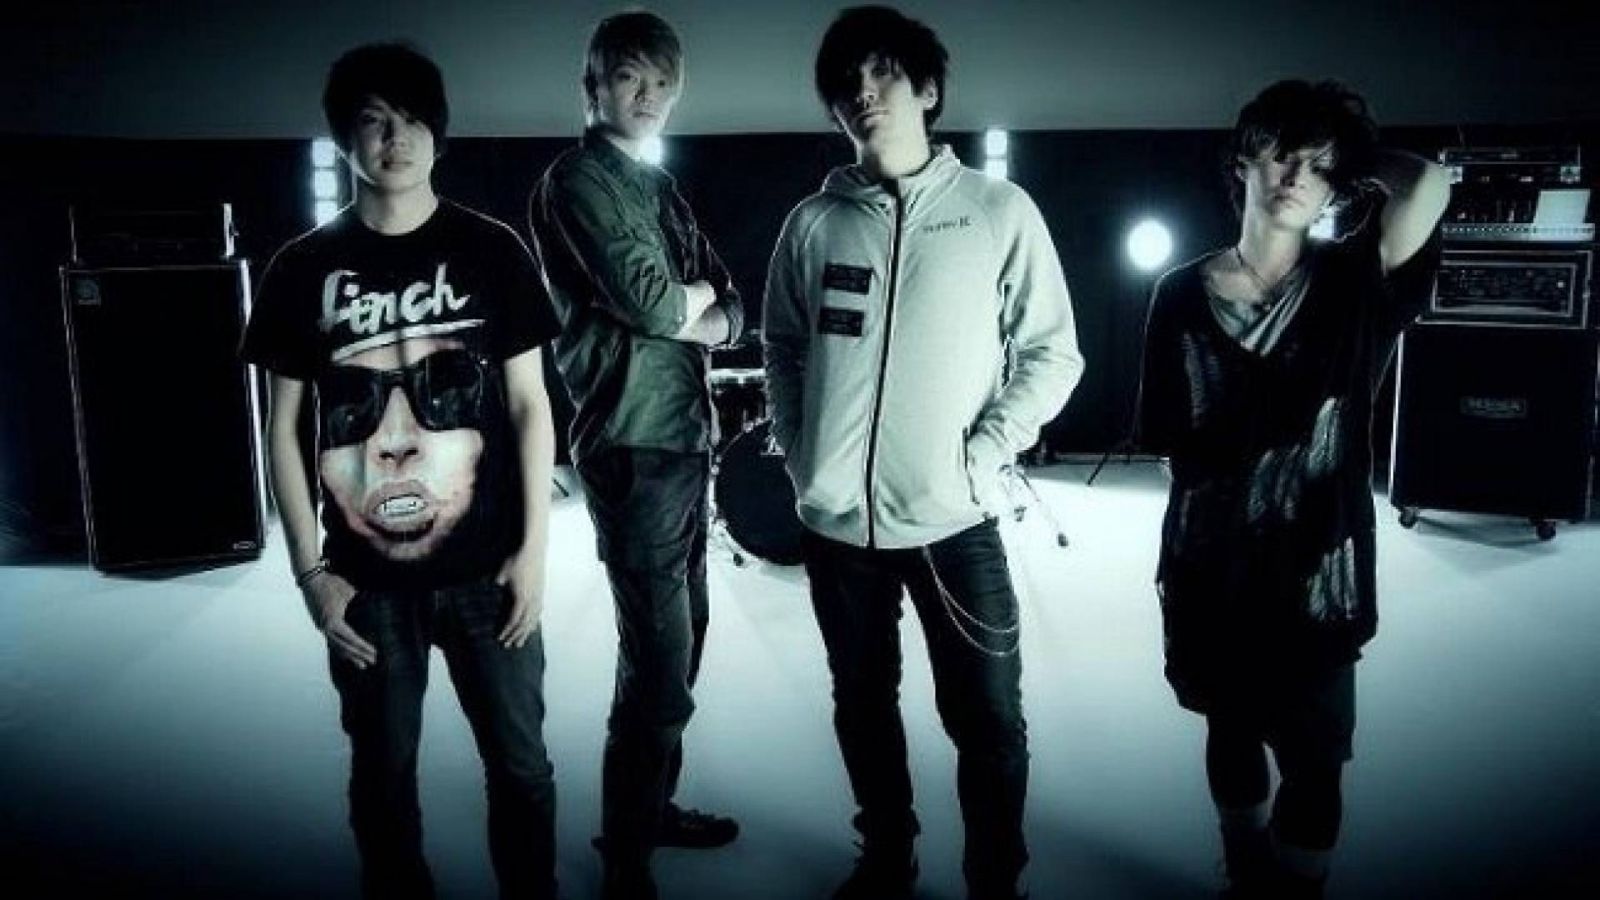 Silhouette from the Skylit © 